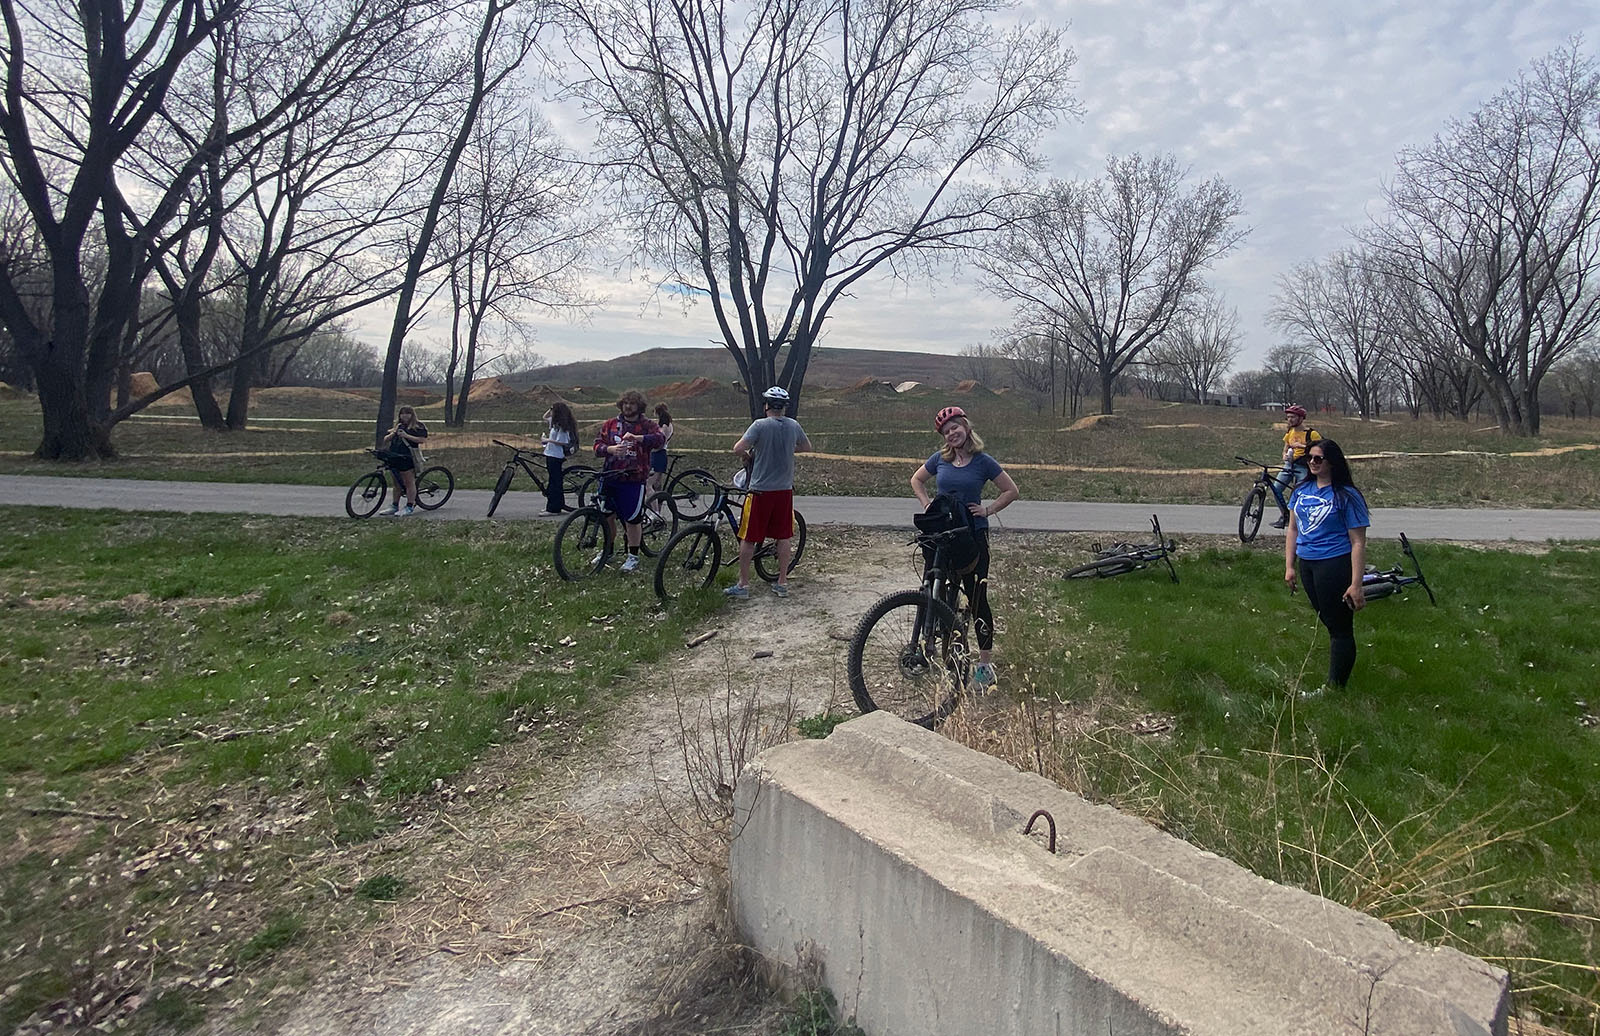 A group of 8 students stand and drink water beside their bicycles as they stop for a break during a site visit to Big Marsh Park